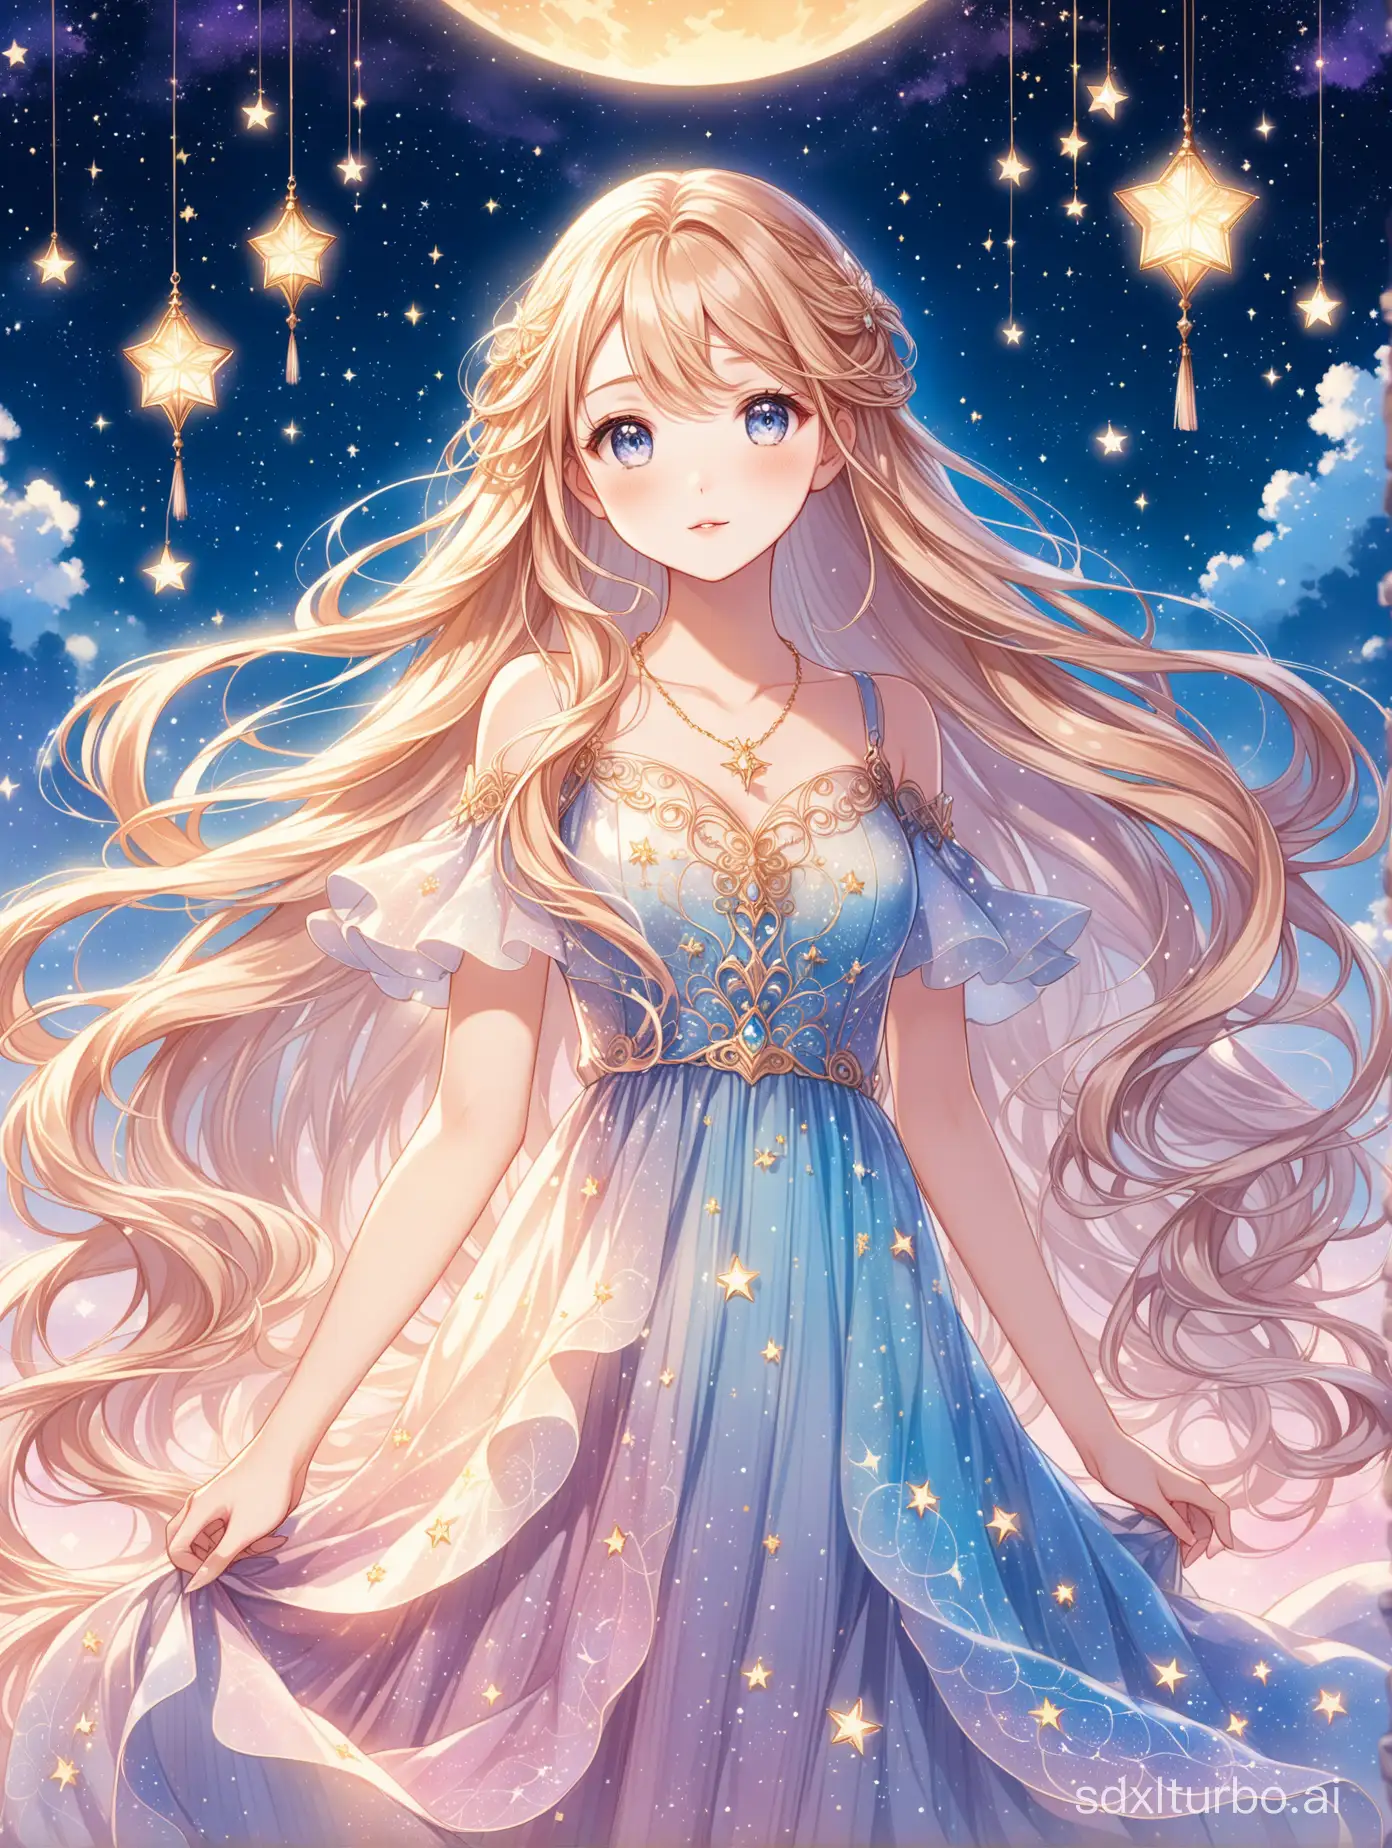 Ethereal-Anime-Girl-Portrait-with-Starry-Sky-Background